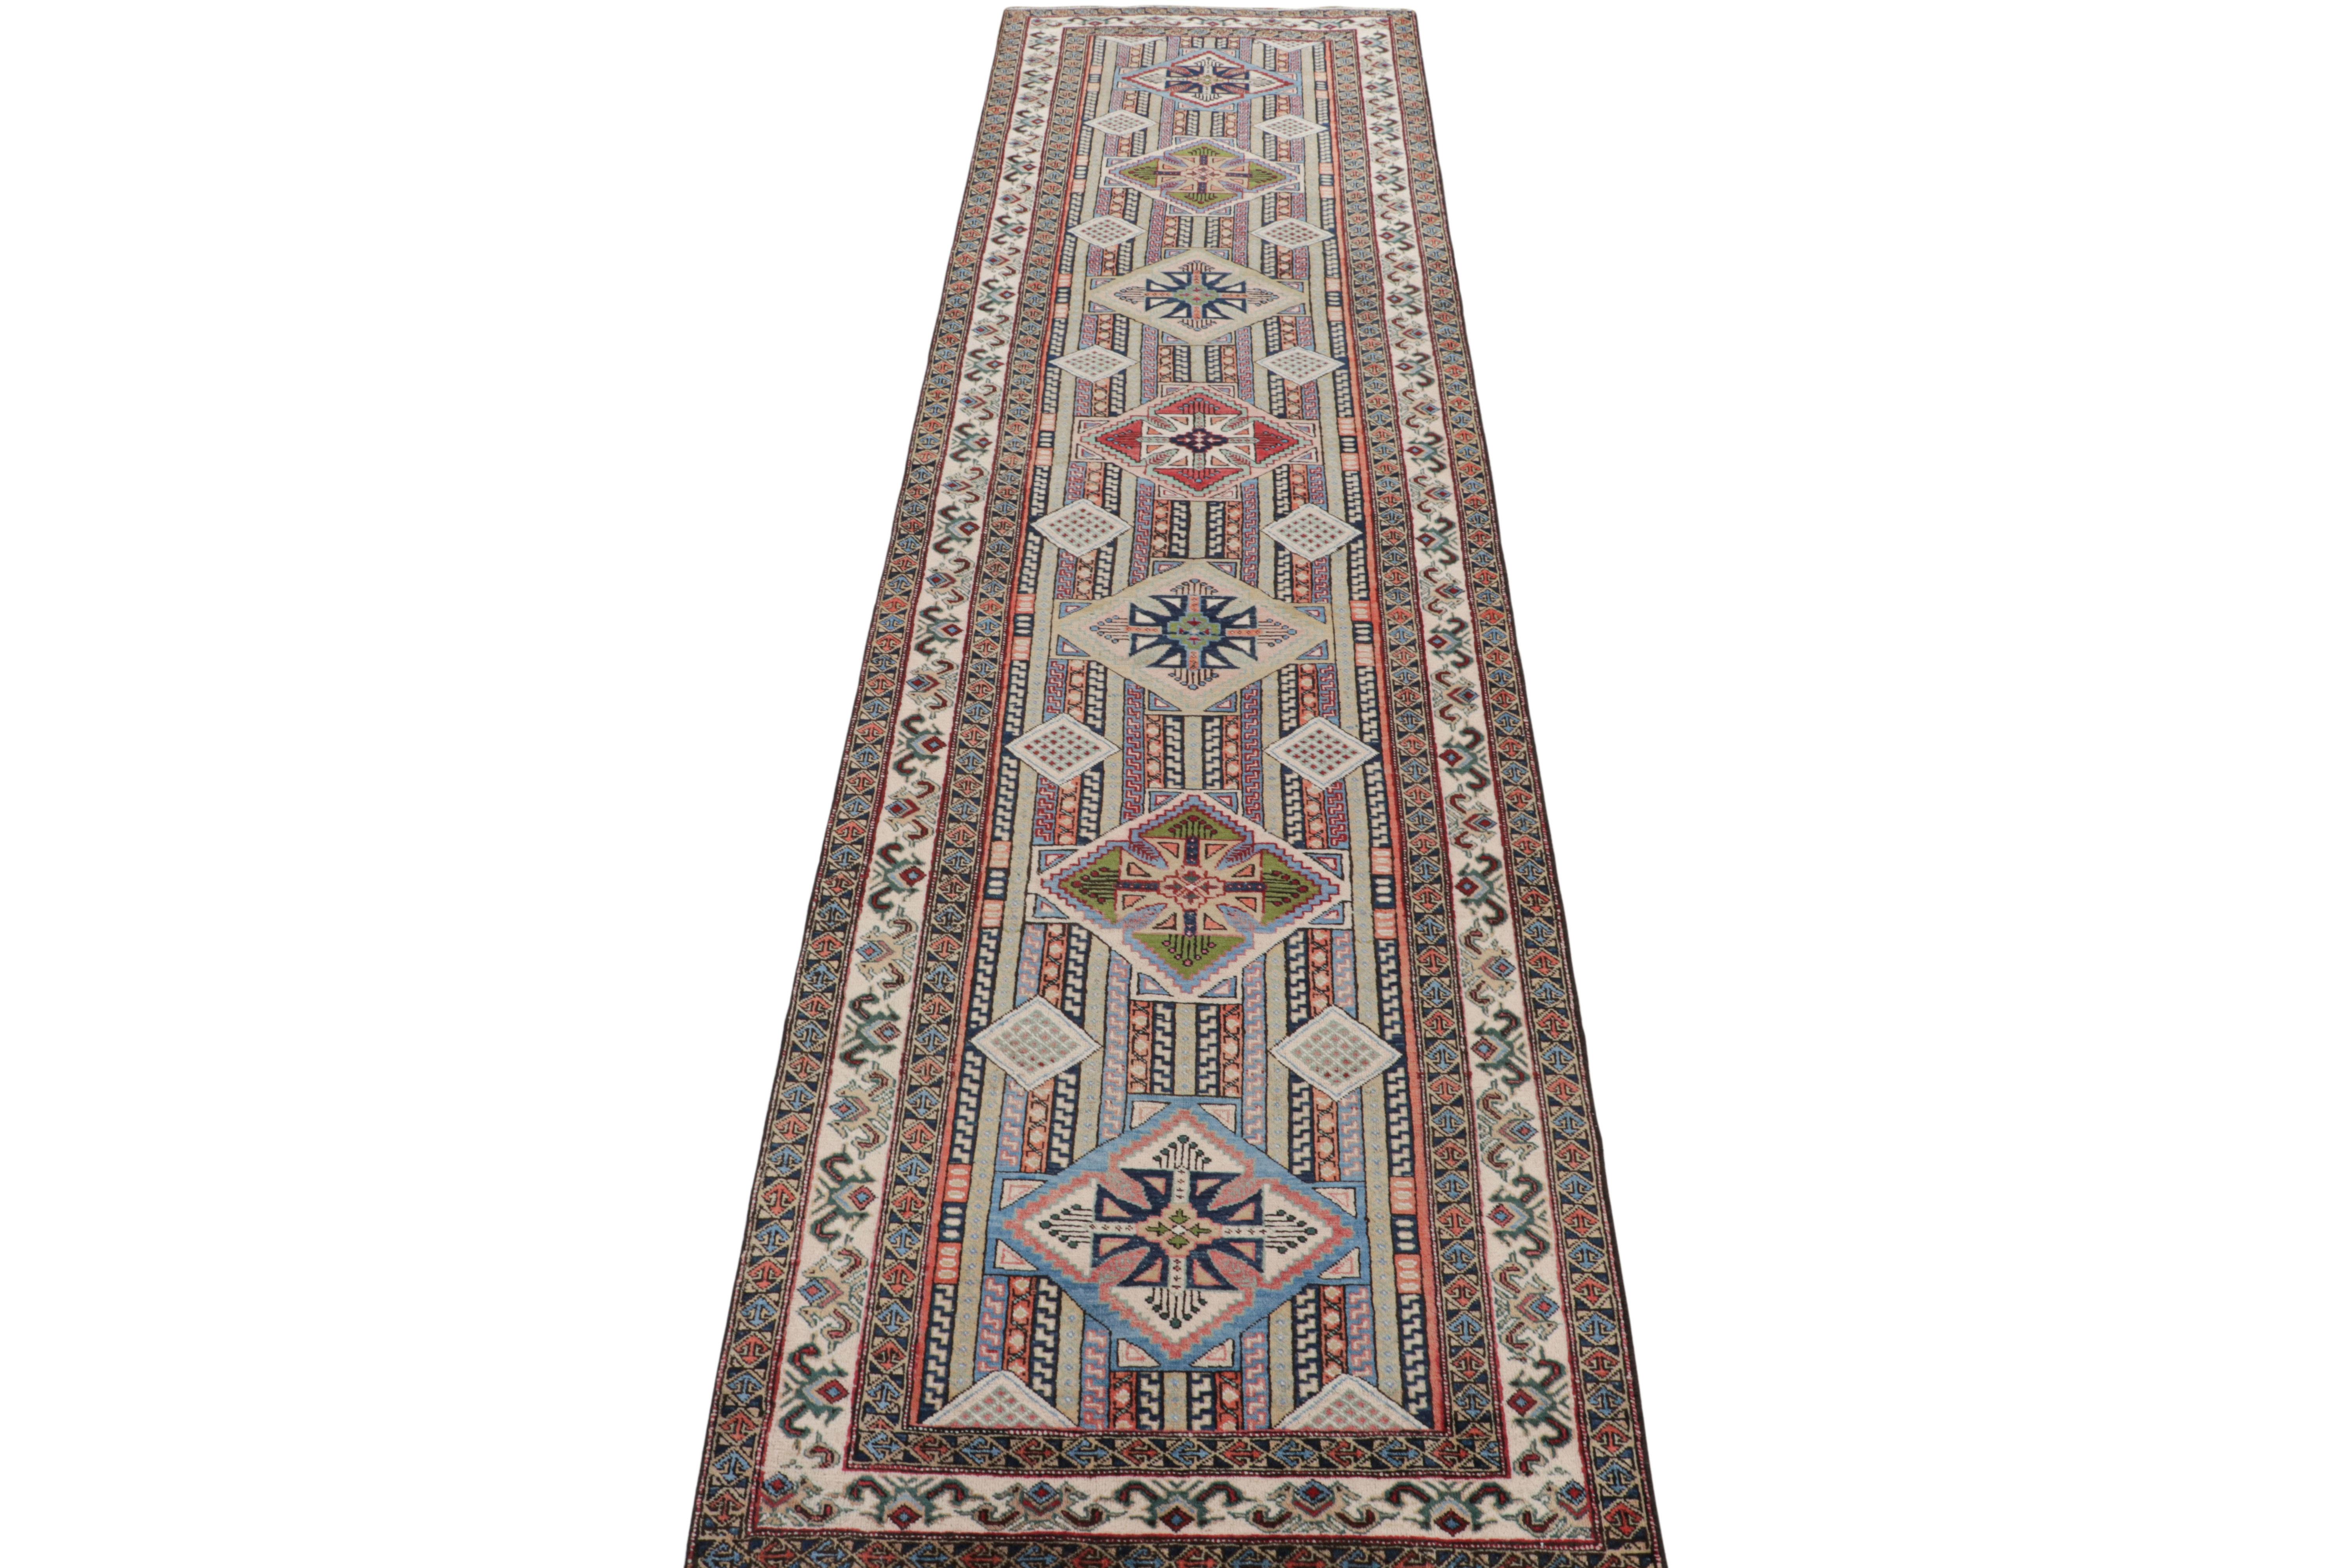 Vintage Beige Green and Red Azerbaijan Wool Persian Pile Runner by Rug & Kilim In Good Condition For Sale In Long Island City, NY